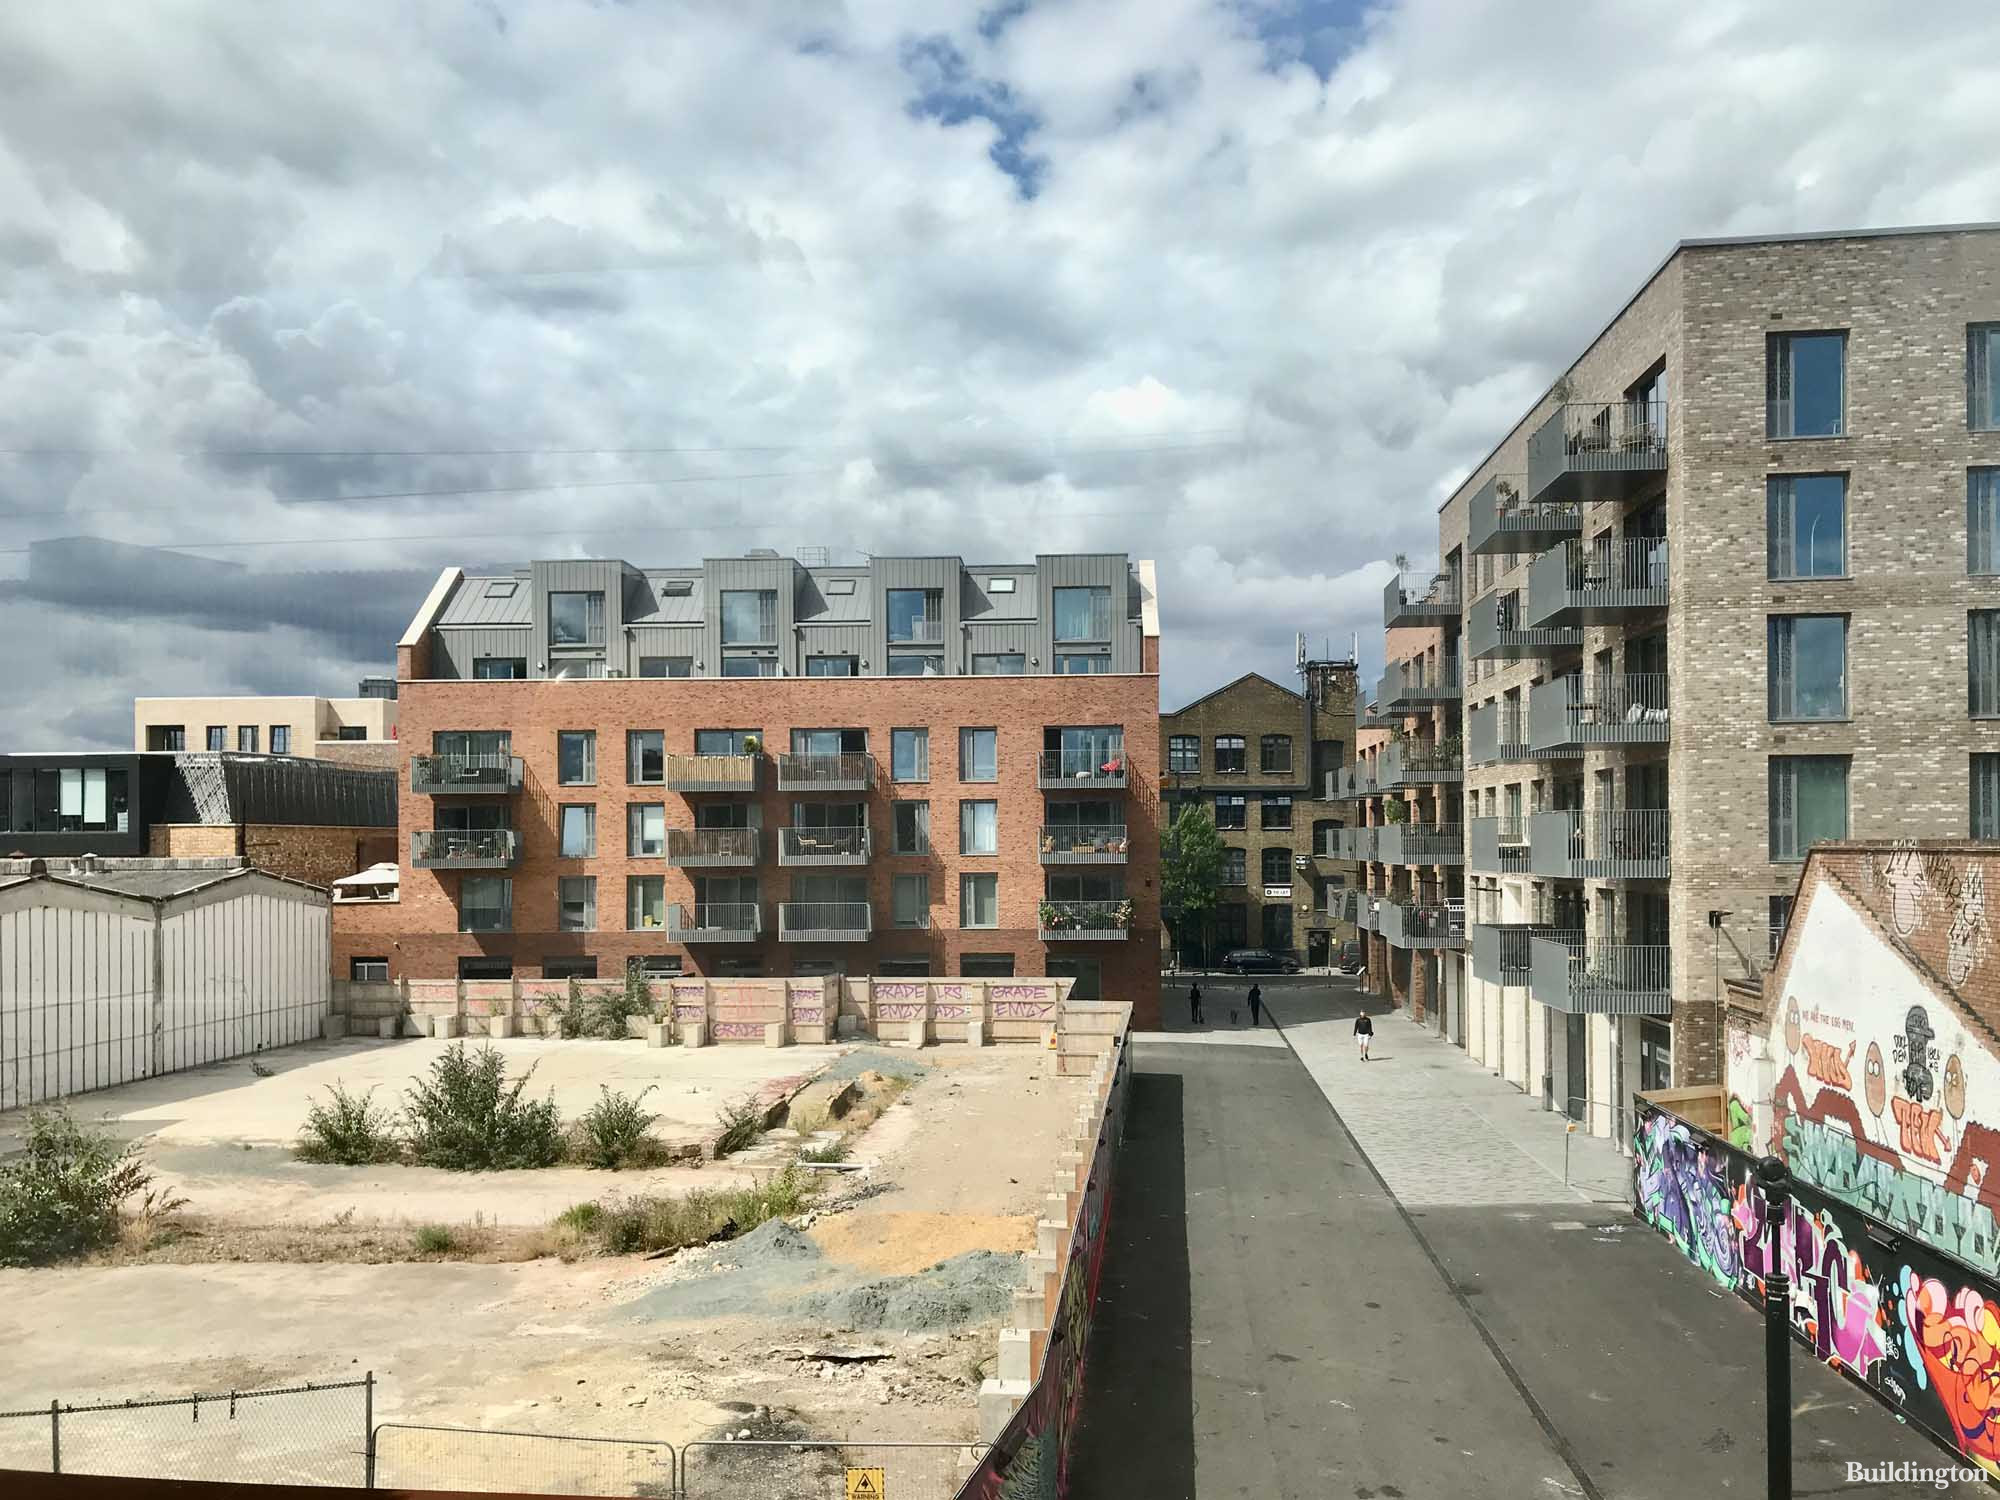 View to Stone Studios apartment buildings from Hackney Wick Station.